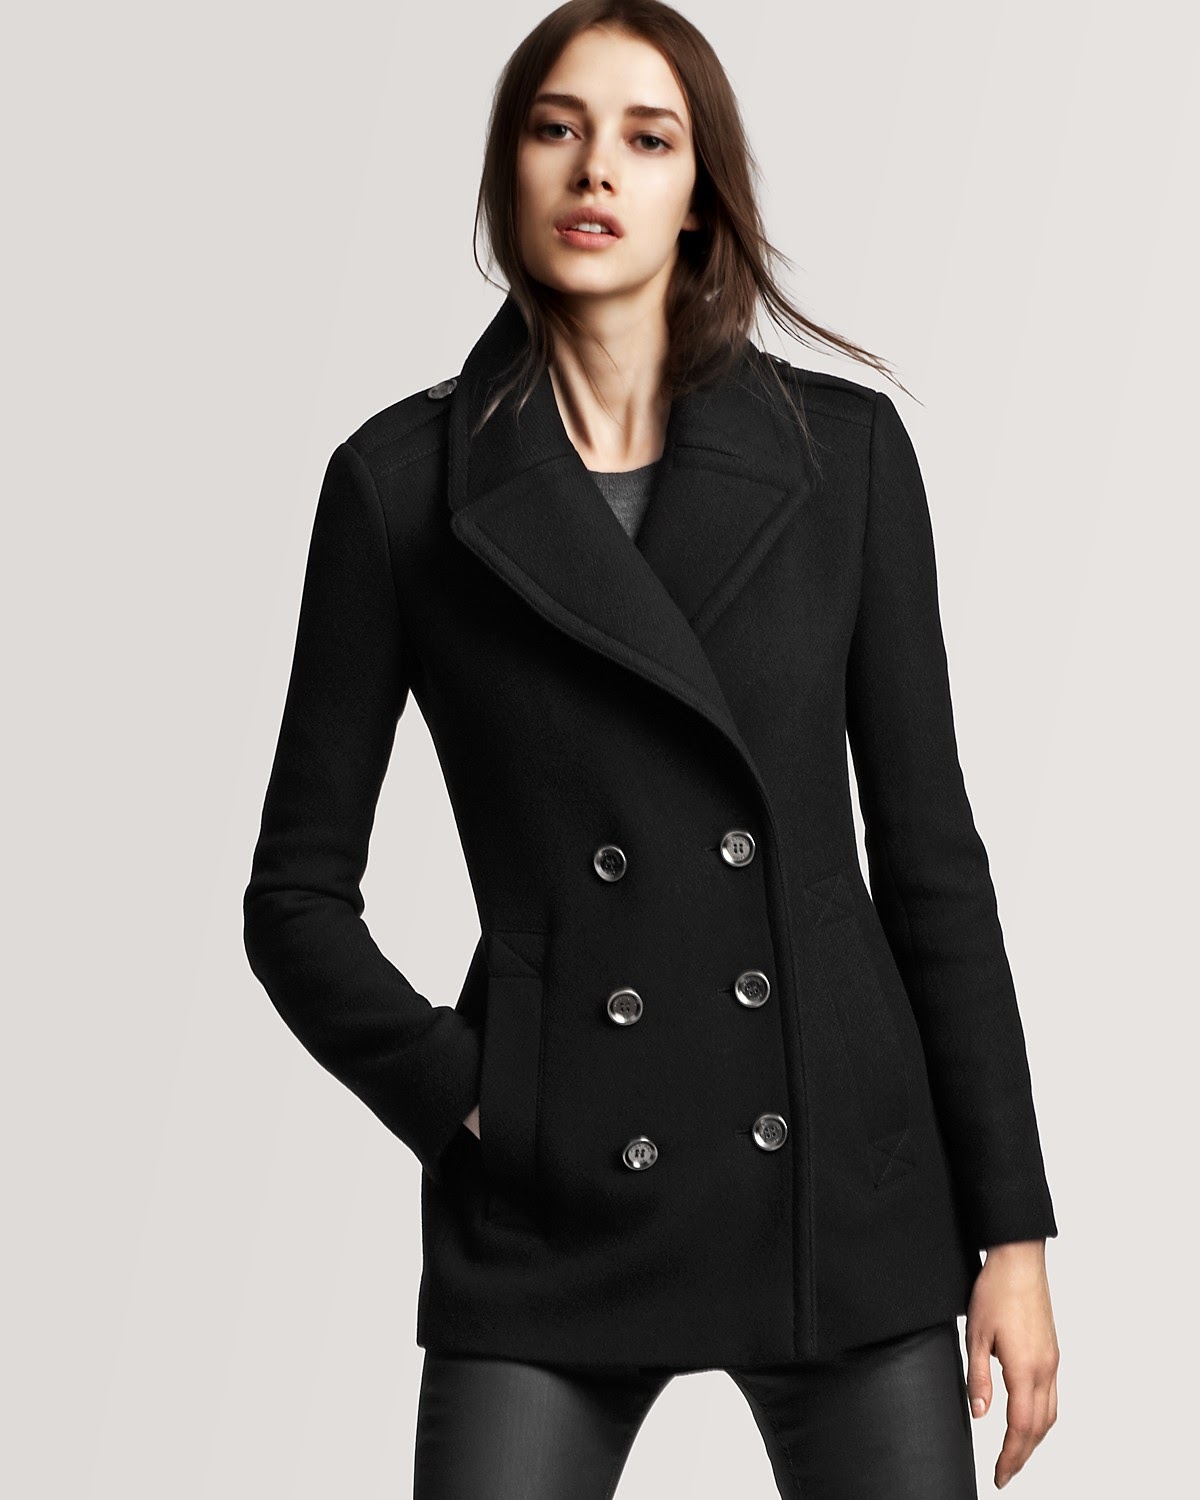 A Navy Pea Coat; not just for winter. - Poor Mother